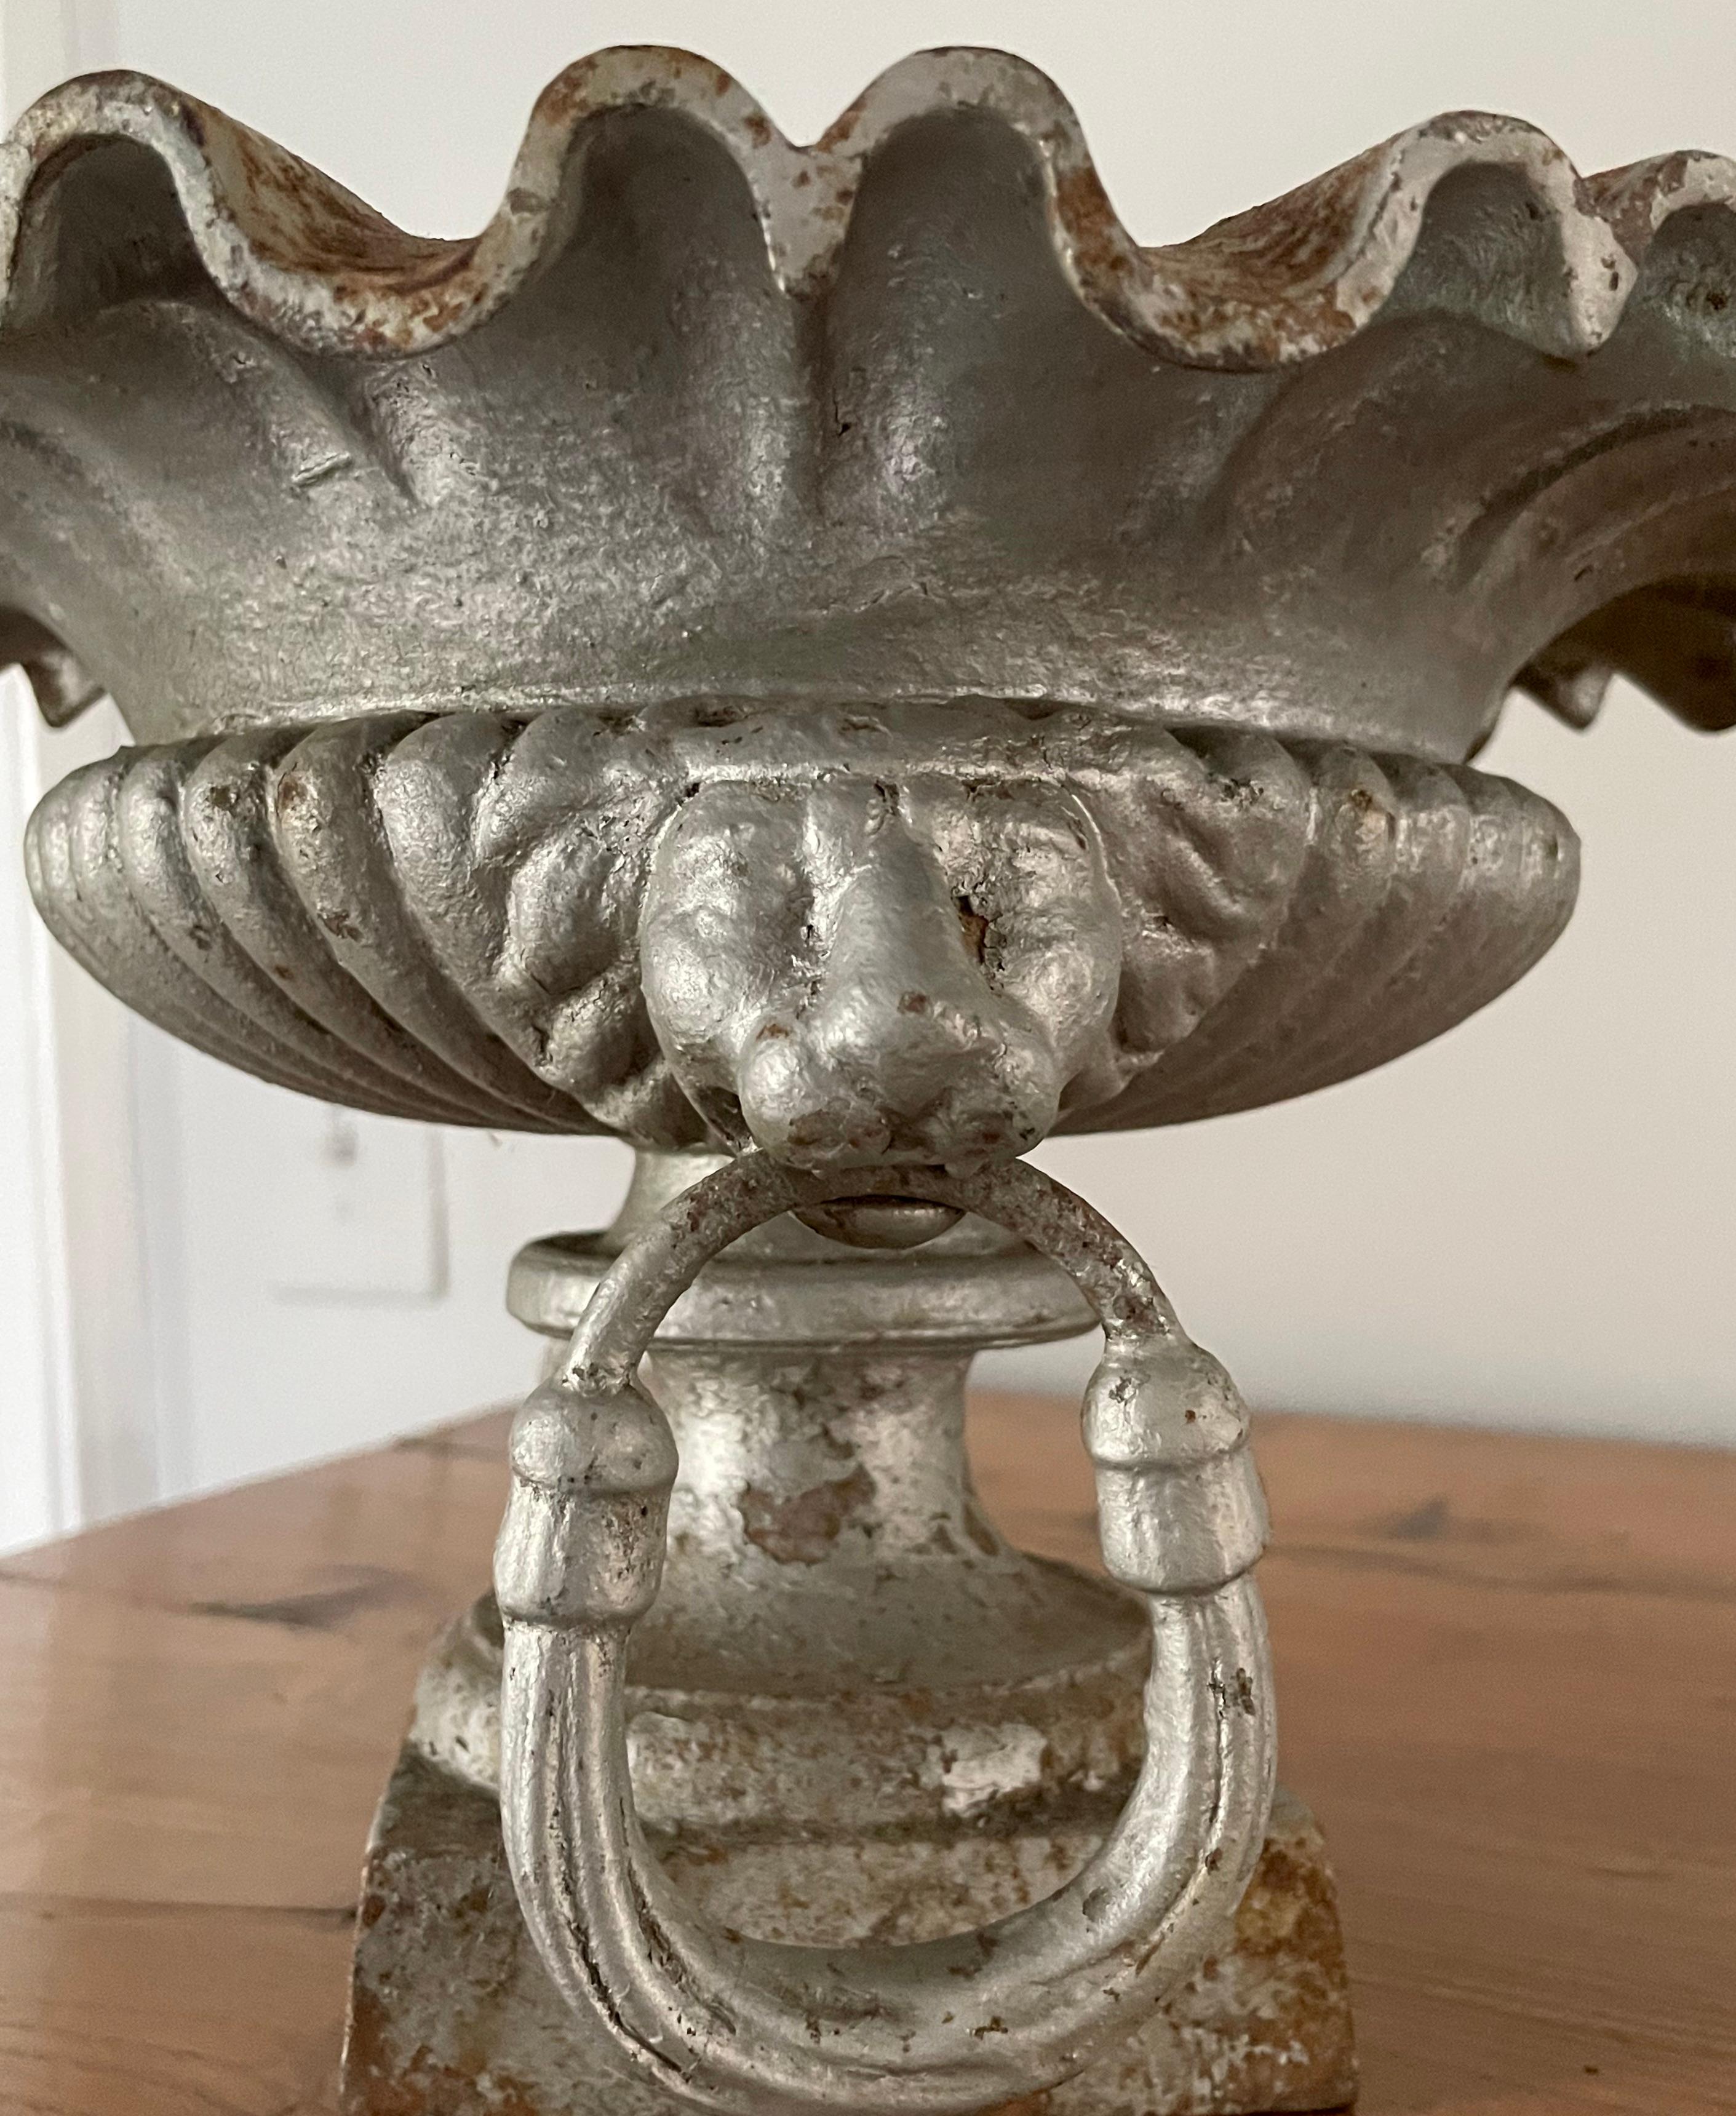 Rare Pair of Small French 19th C Cast Iron Urns with Lion Heads and Ruffled Rims For Sale 11